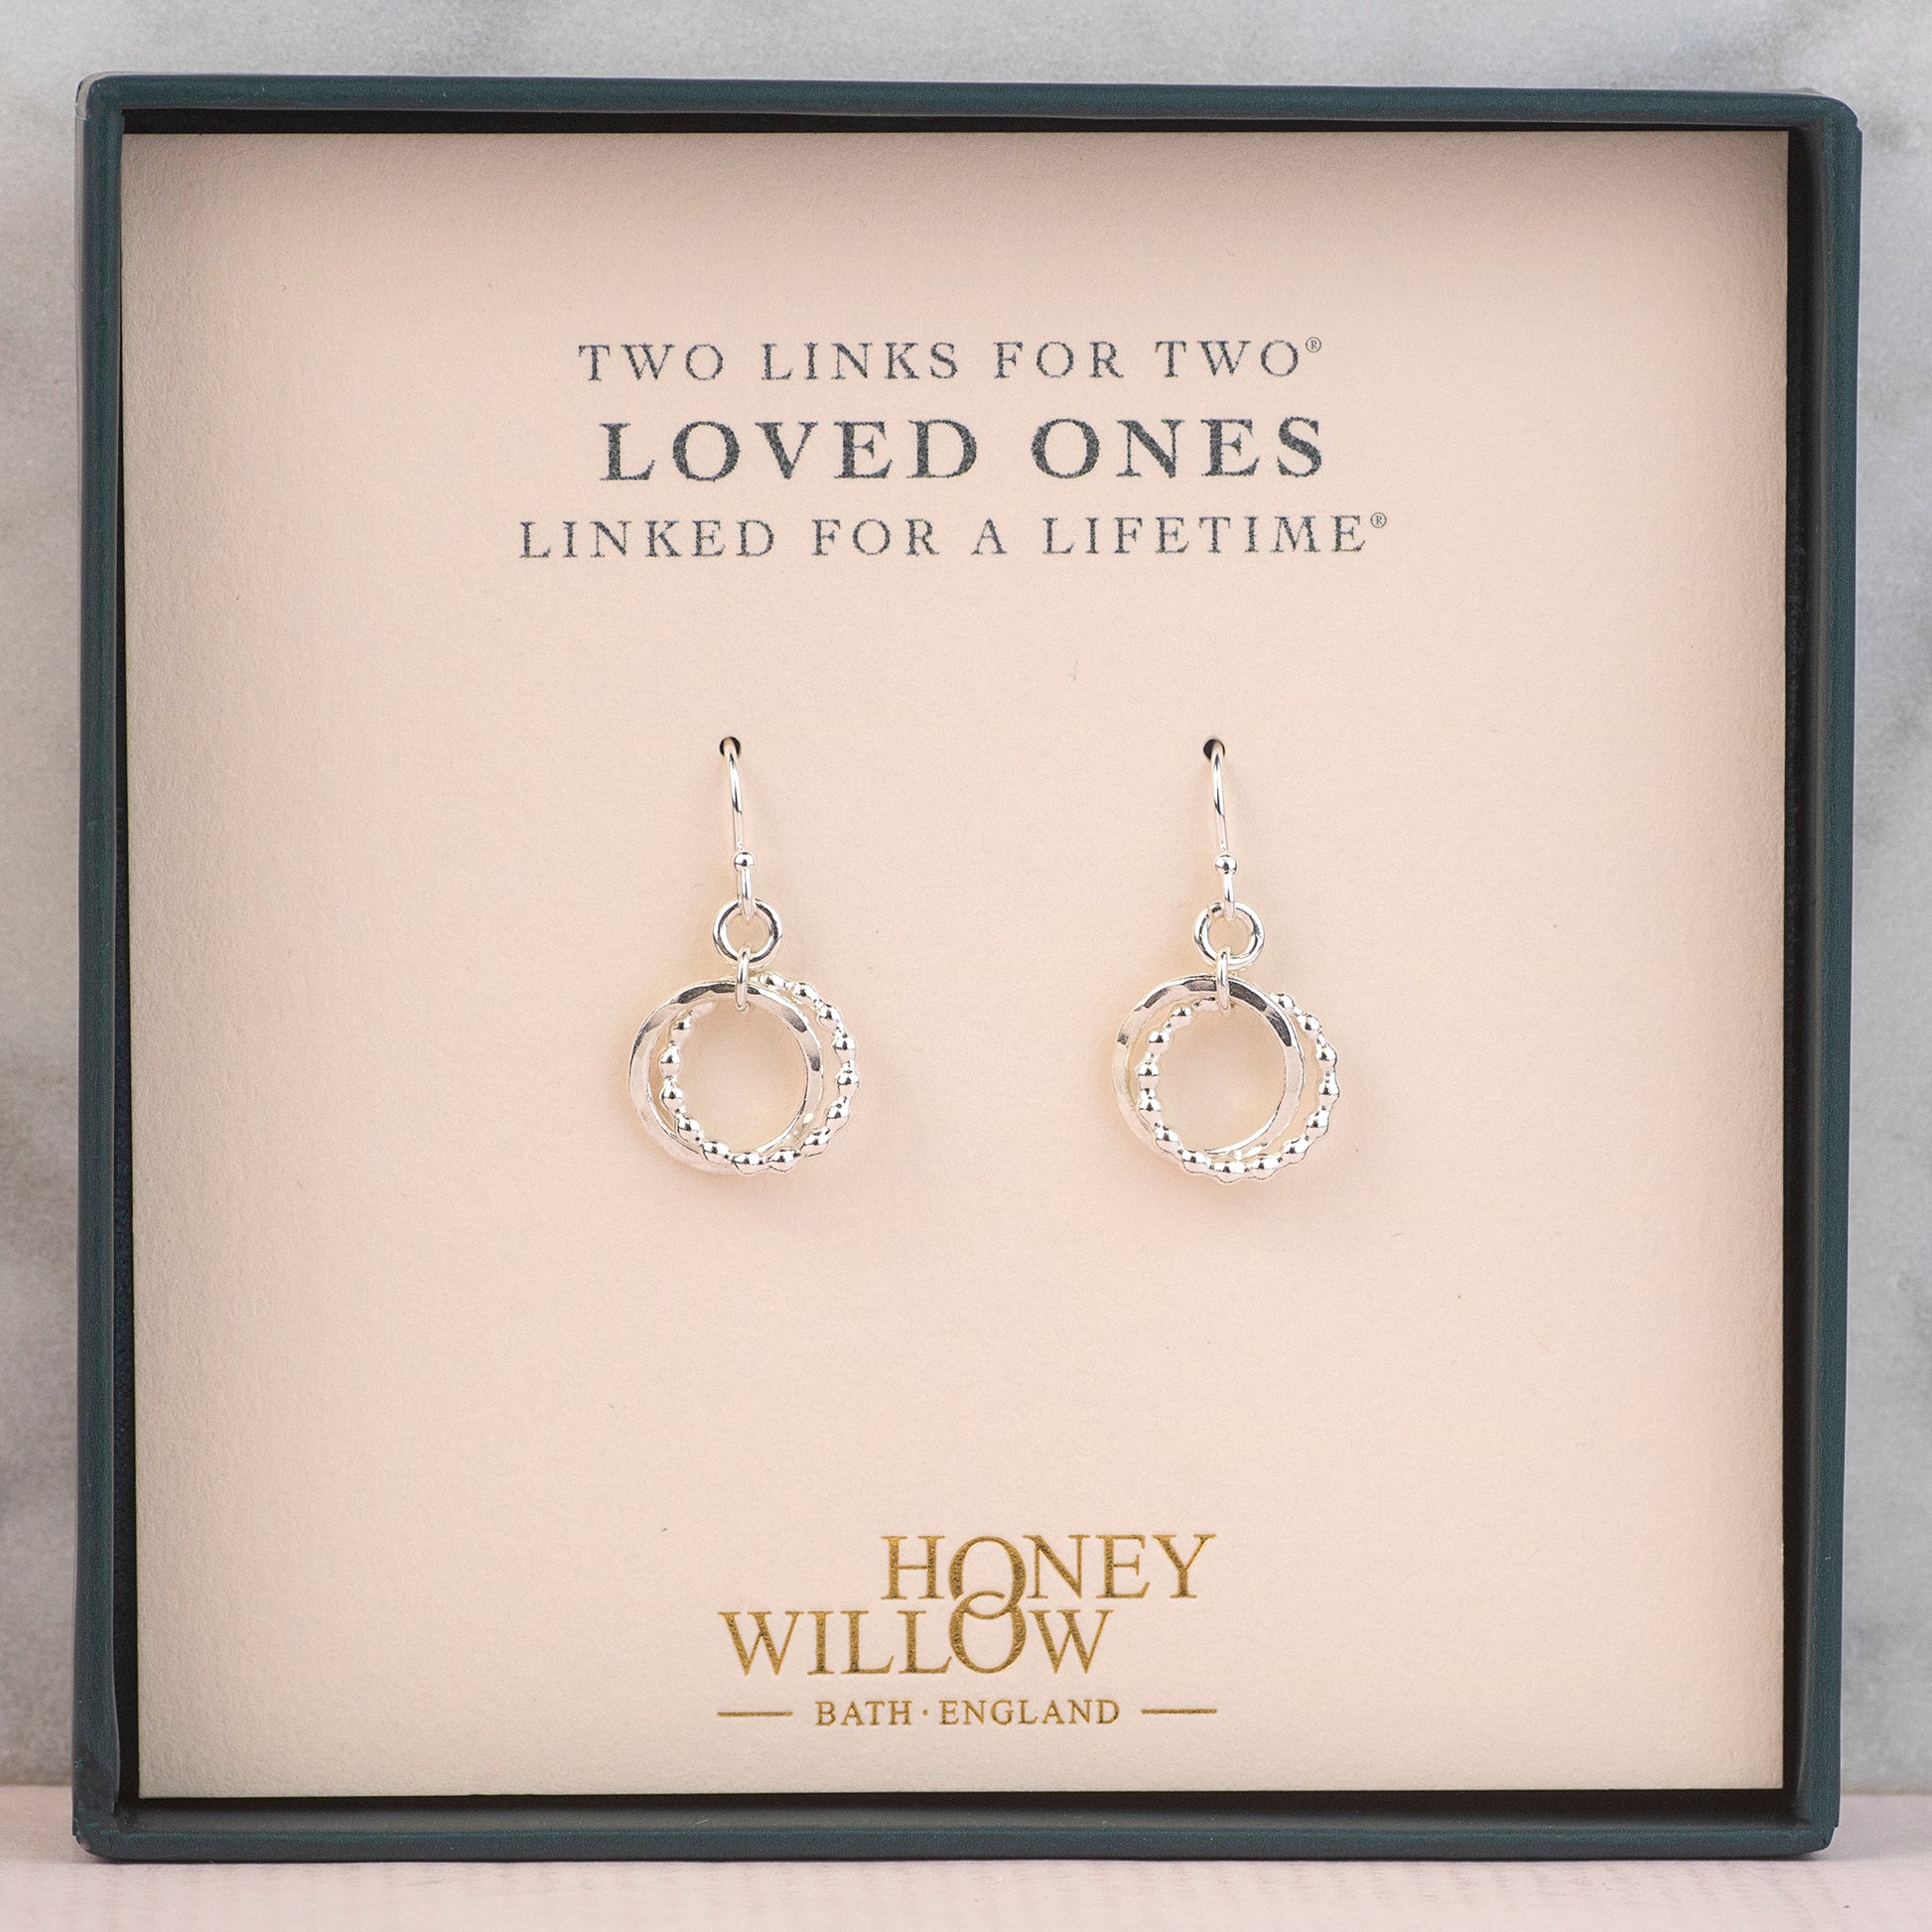 Silver Love Knot Earrings - 2 Loved Ones Linked for a Lifetime